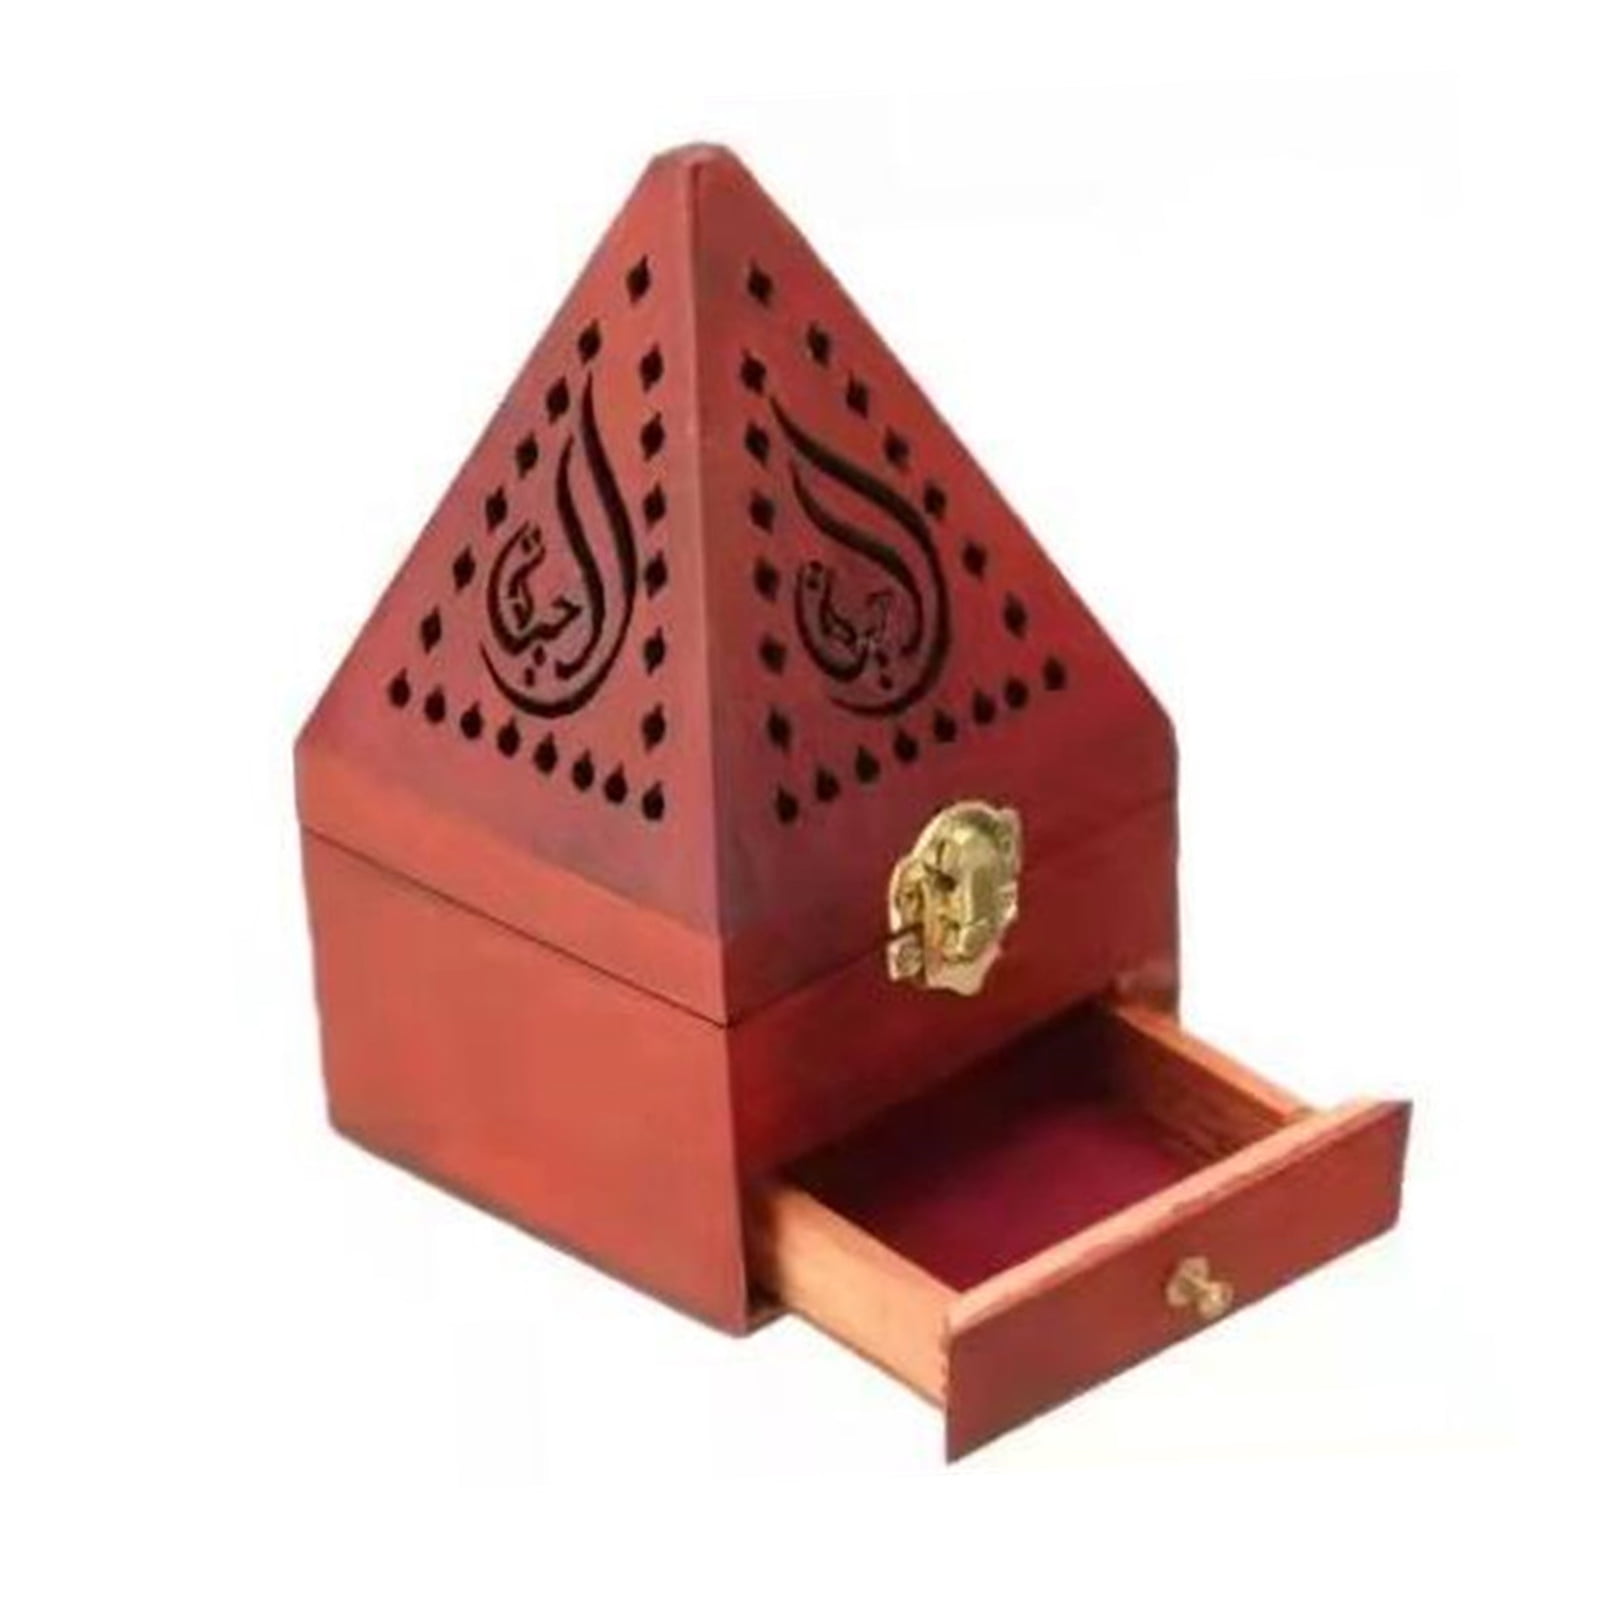 10 free Scented Cones Scented Wooden Incense Burner Incense cone Holder Chest 